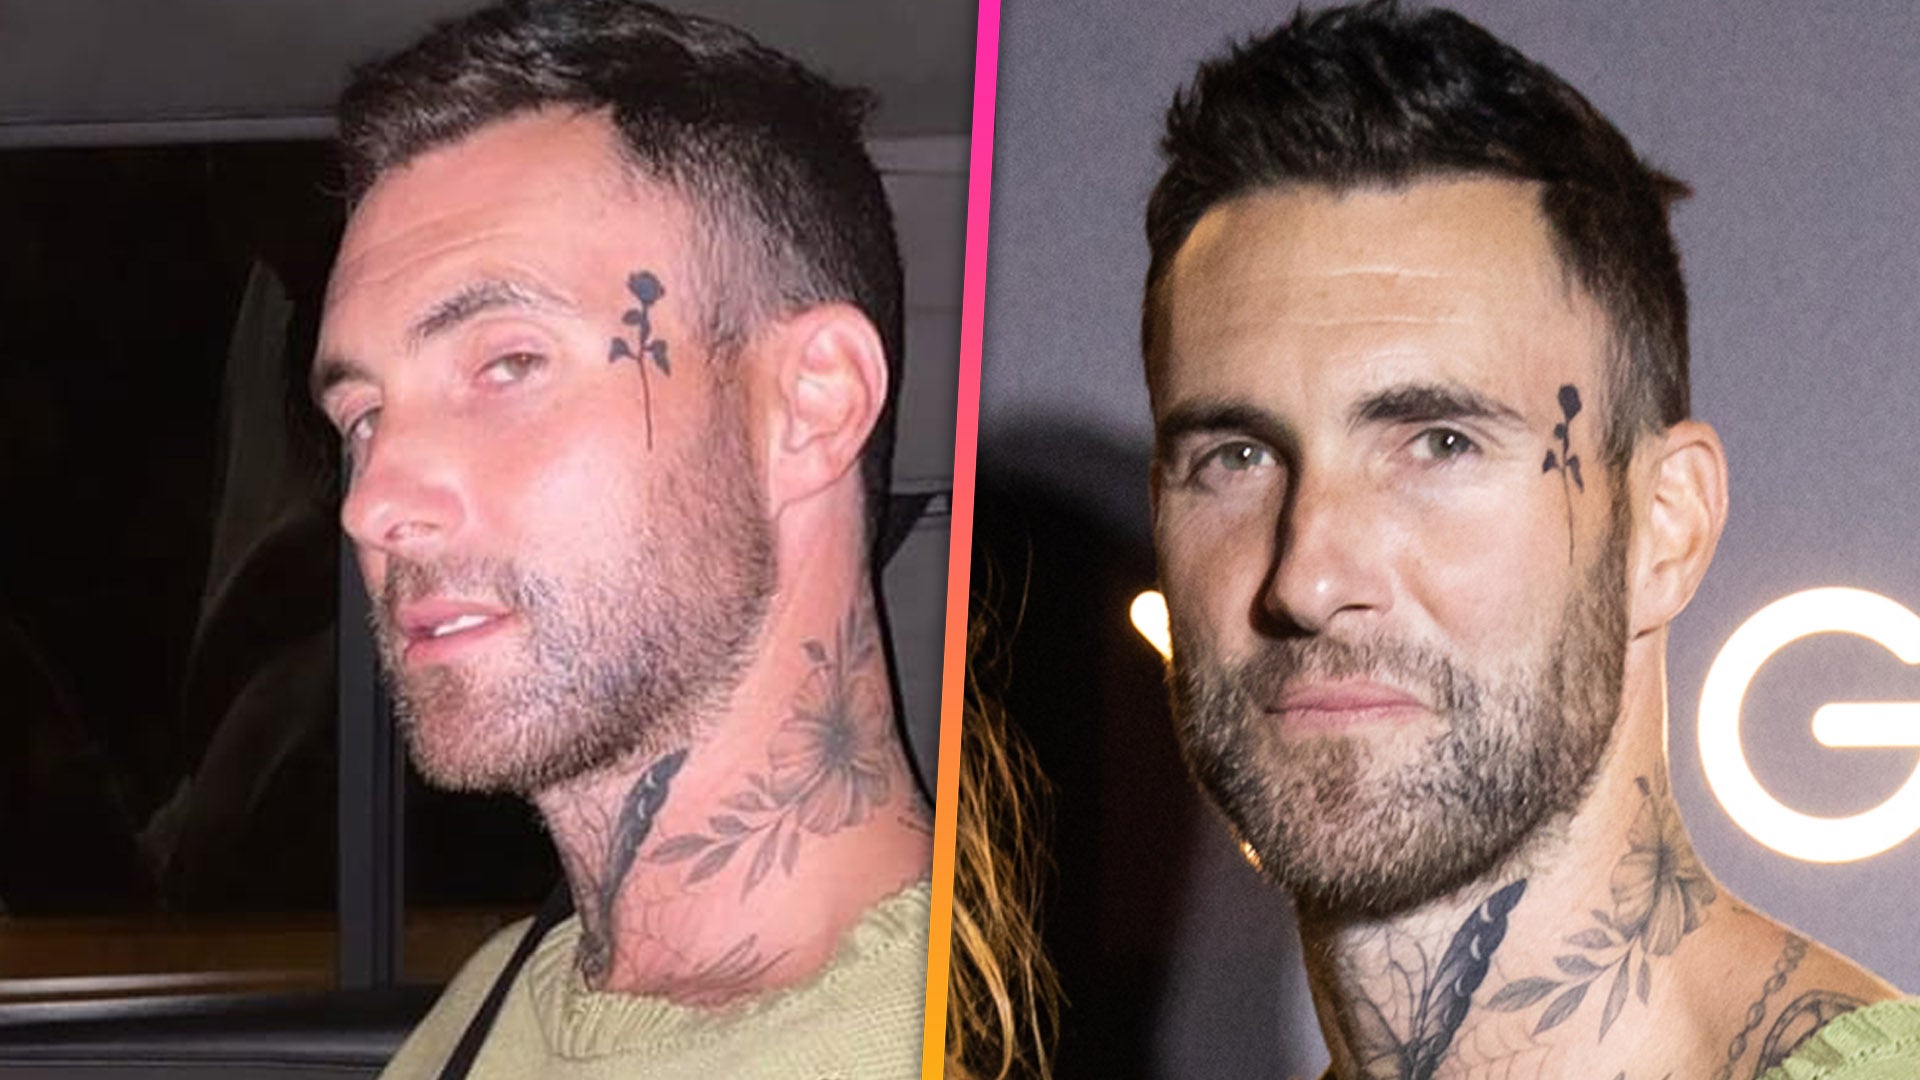 Adam Levine Tattoos  See Photos of the Maroon 5 Singer and Voice Coaches  Tattoos